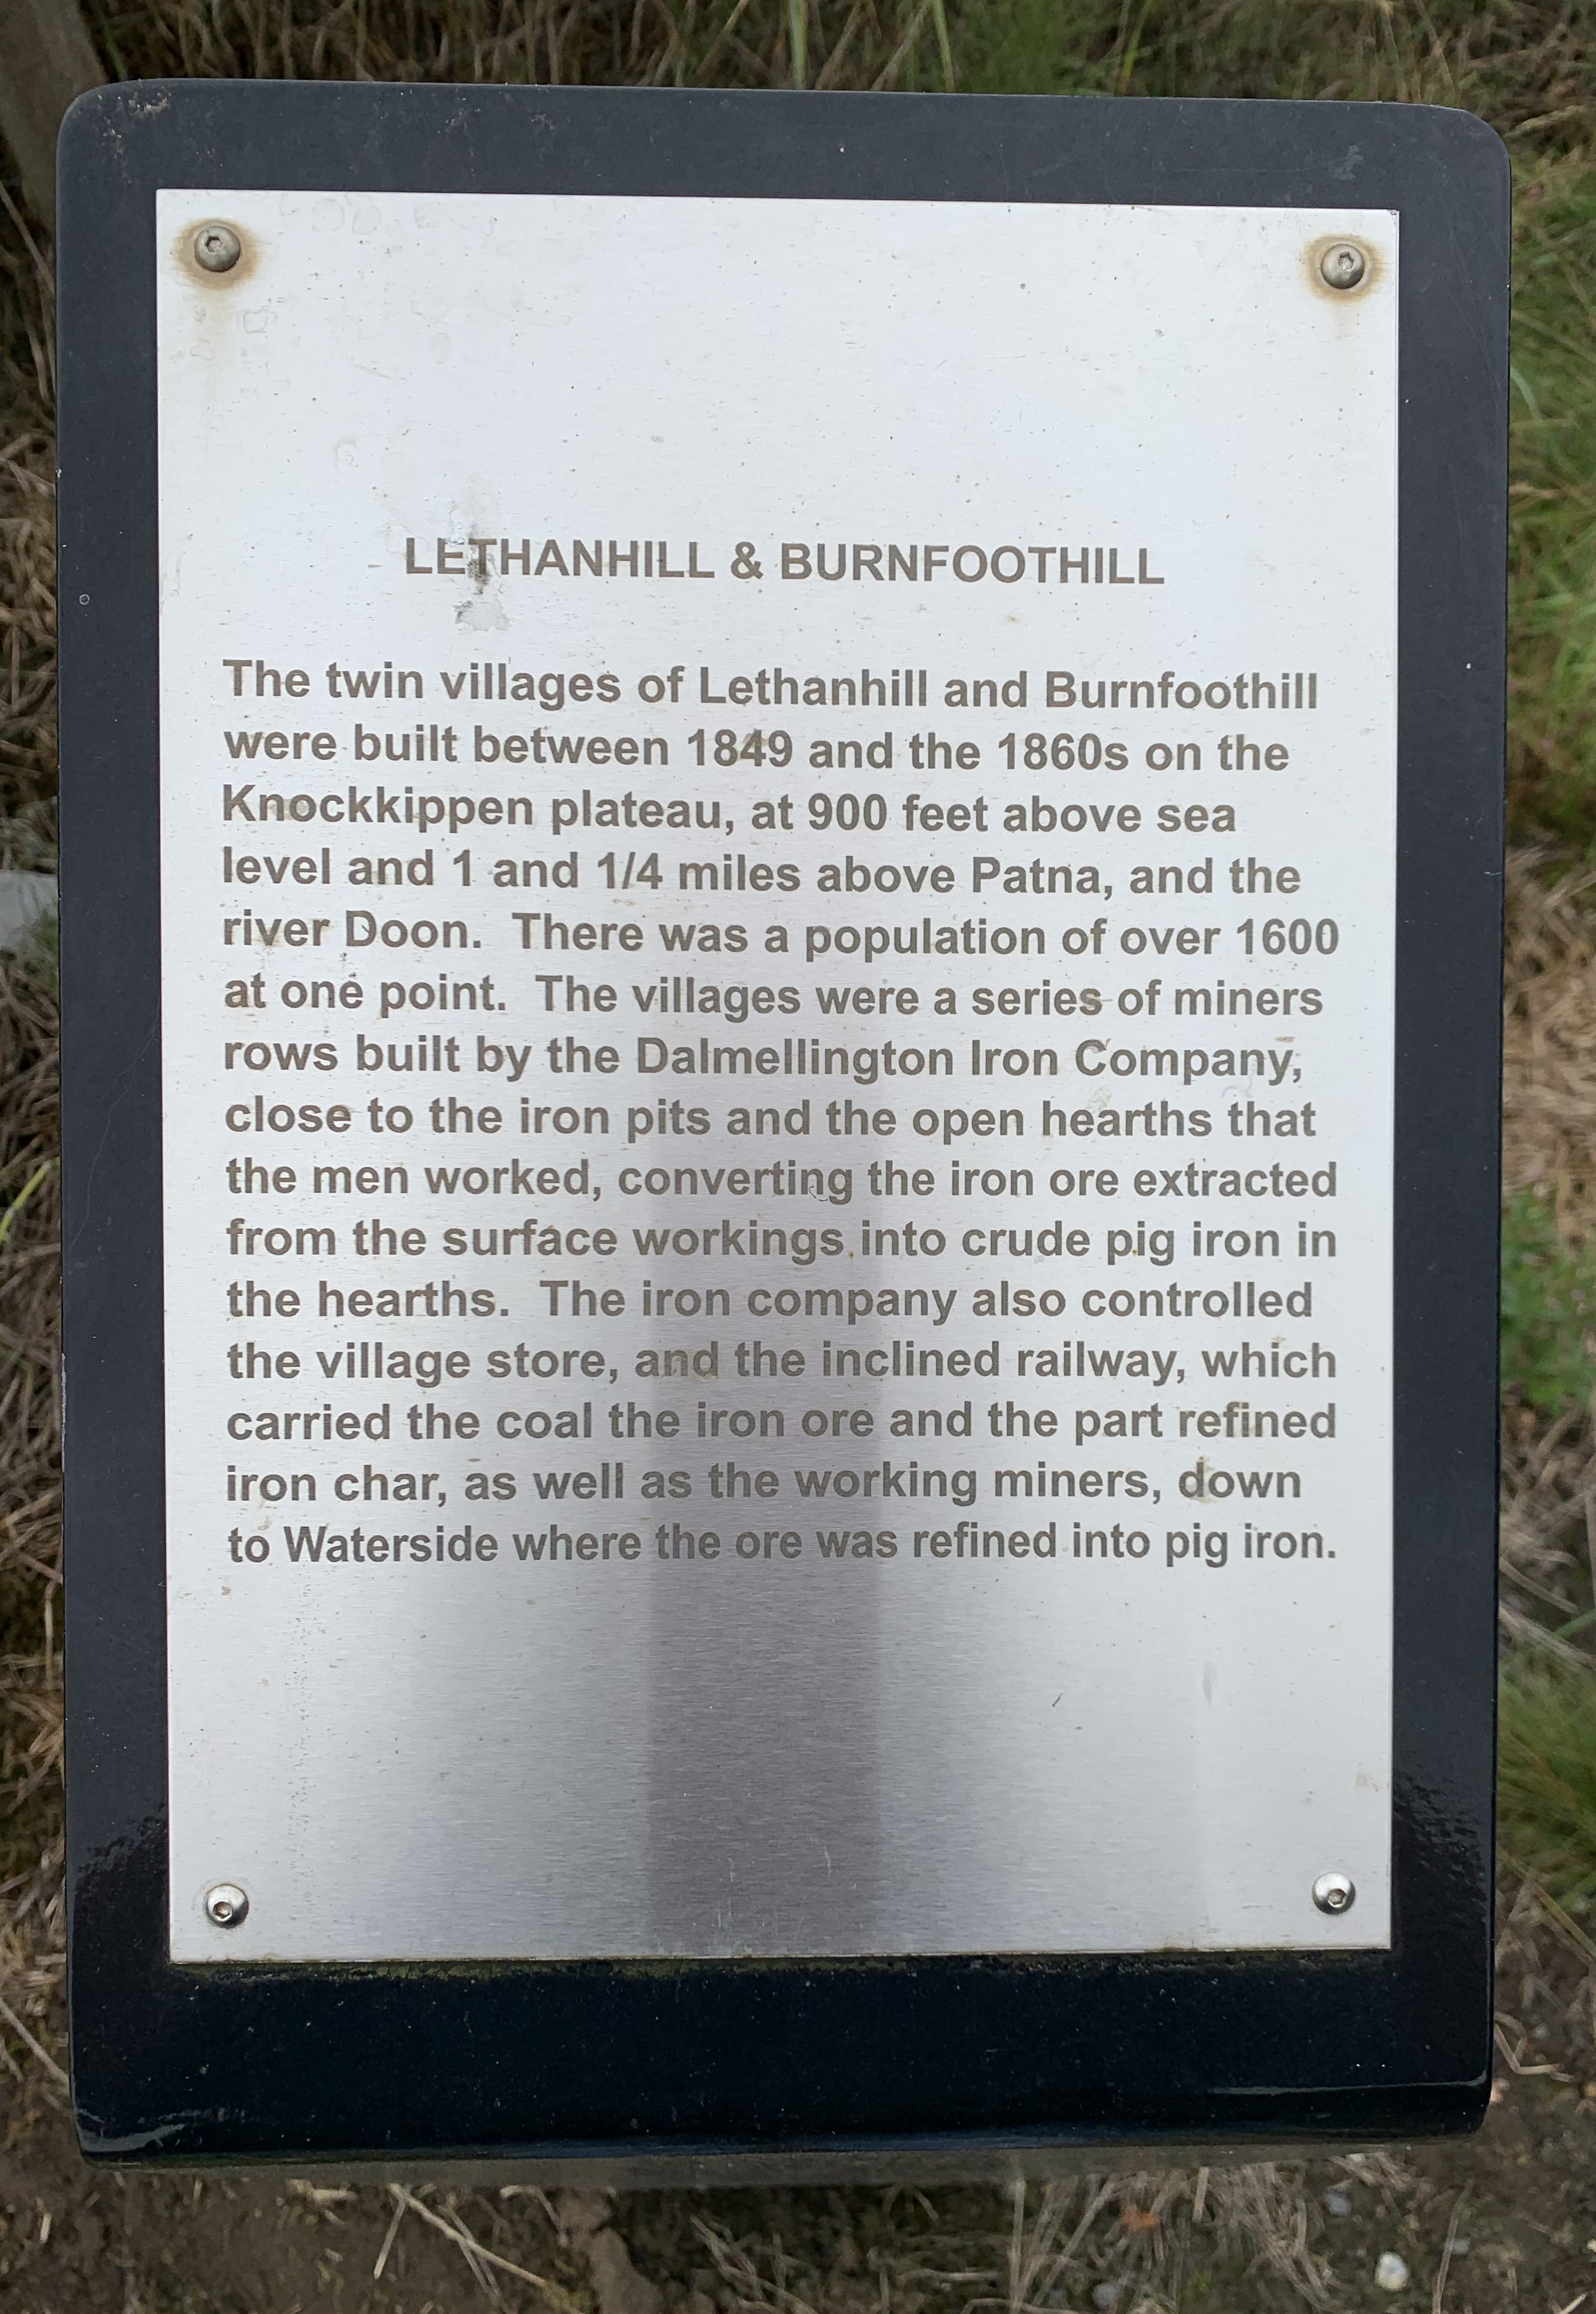 silver metal plaque on a black background marking the road up to the Ayrshire mining villages of Lethanhill and Burnfoothill 